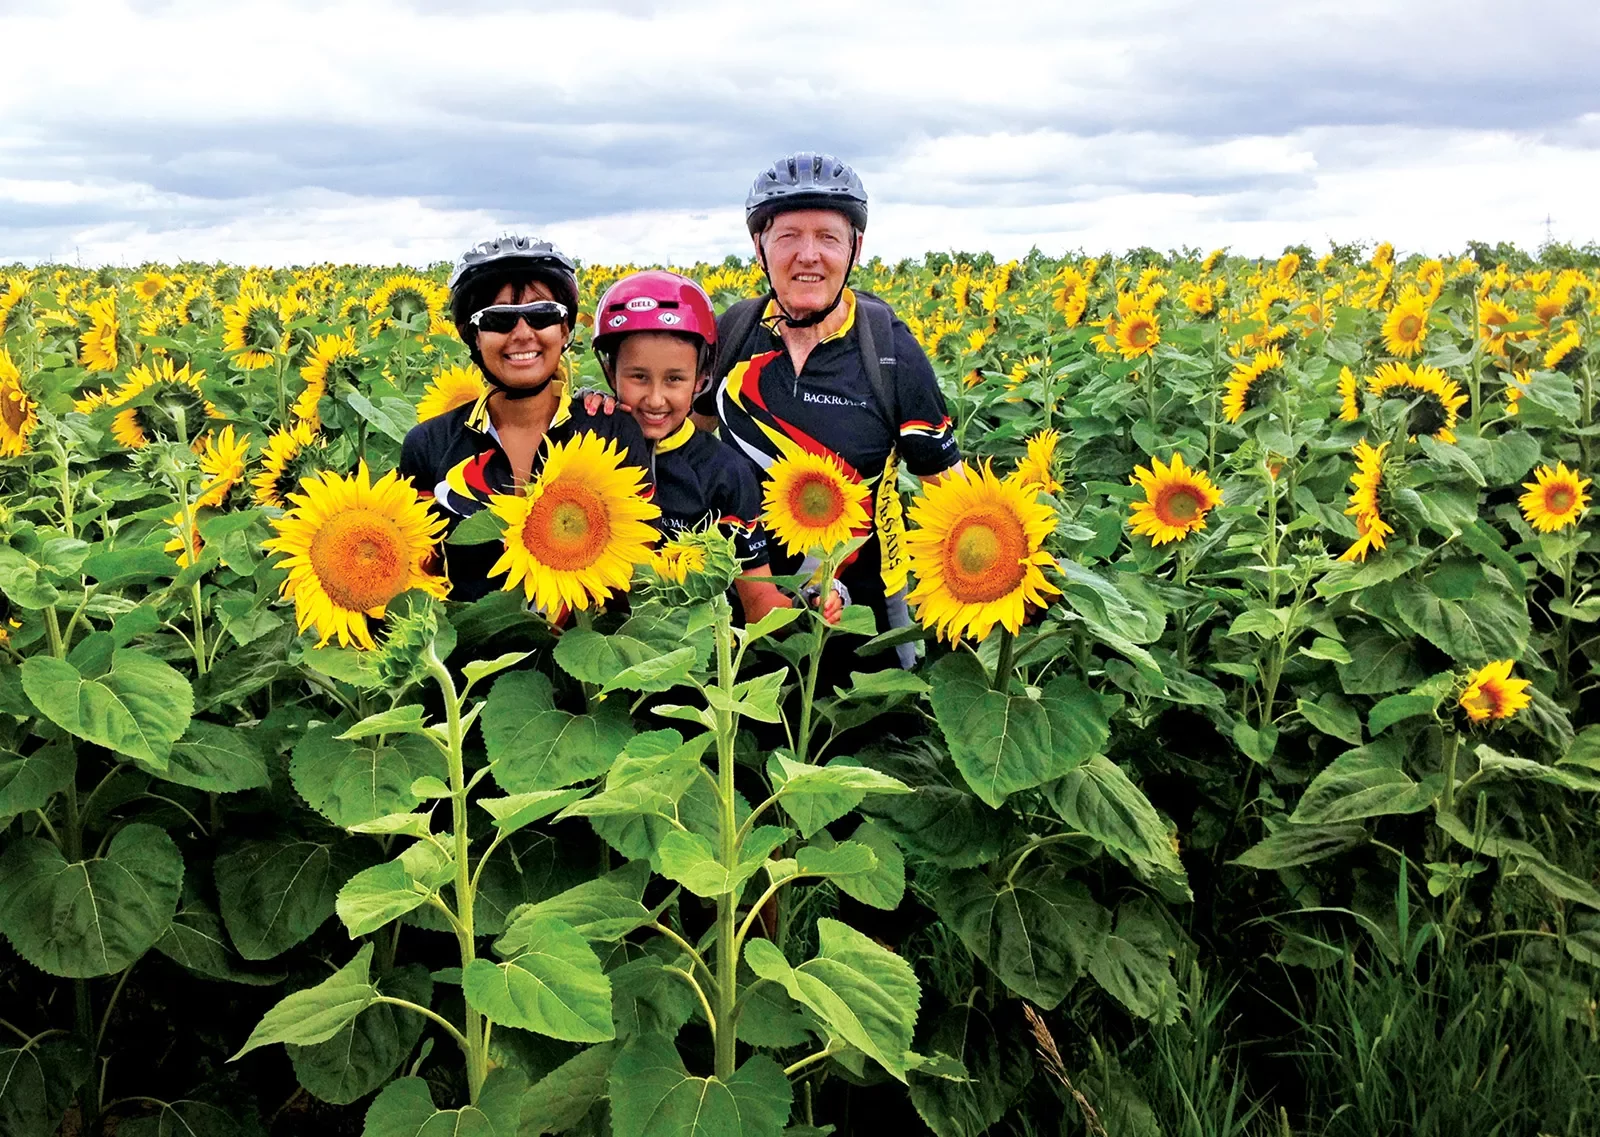 Backroads guests smiling among a field of sunflowers